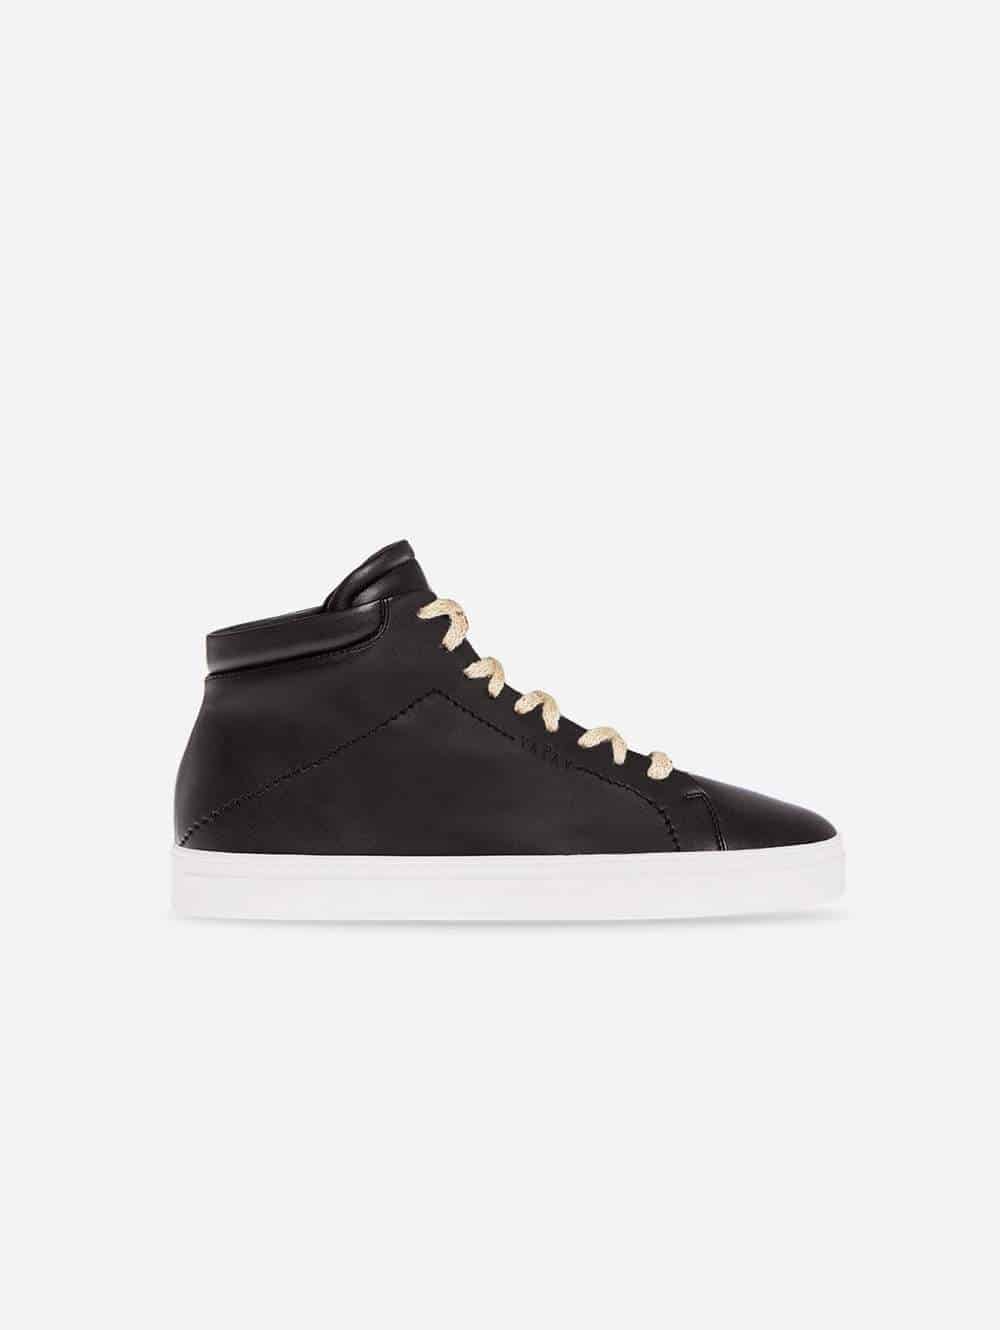 Black high top sneakers with white soles from Yatay